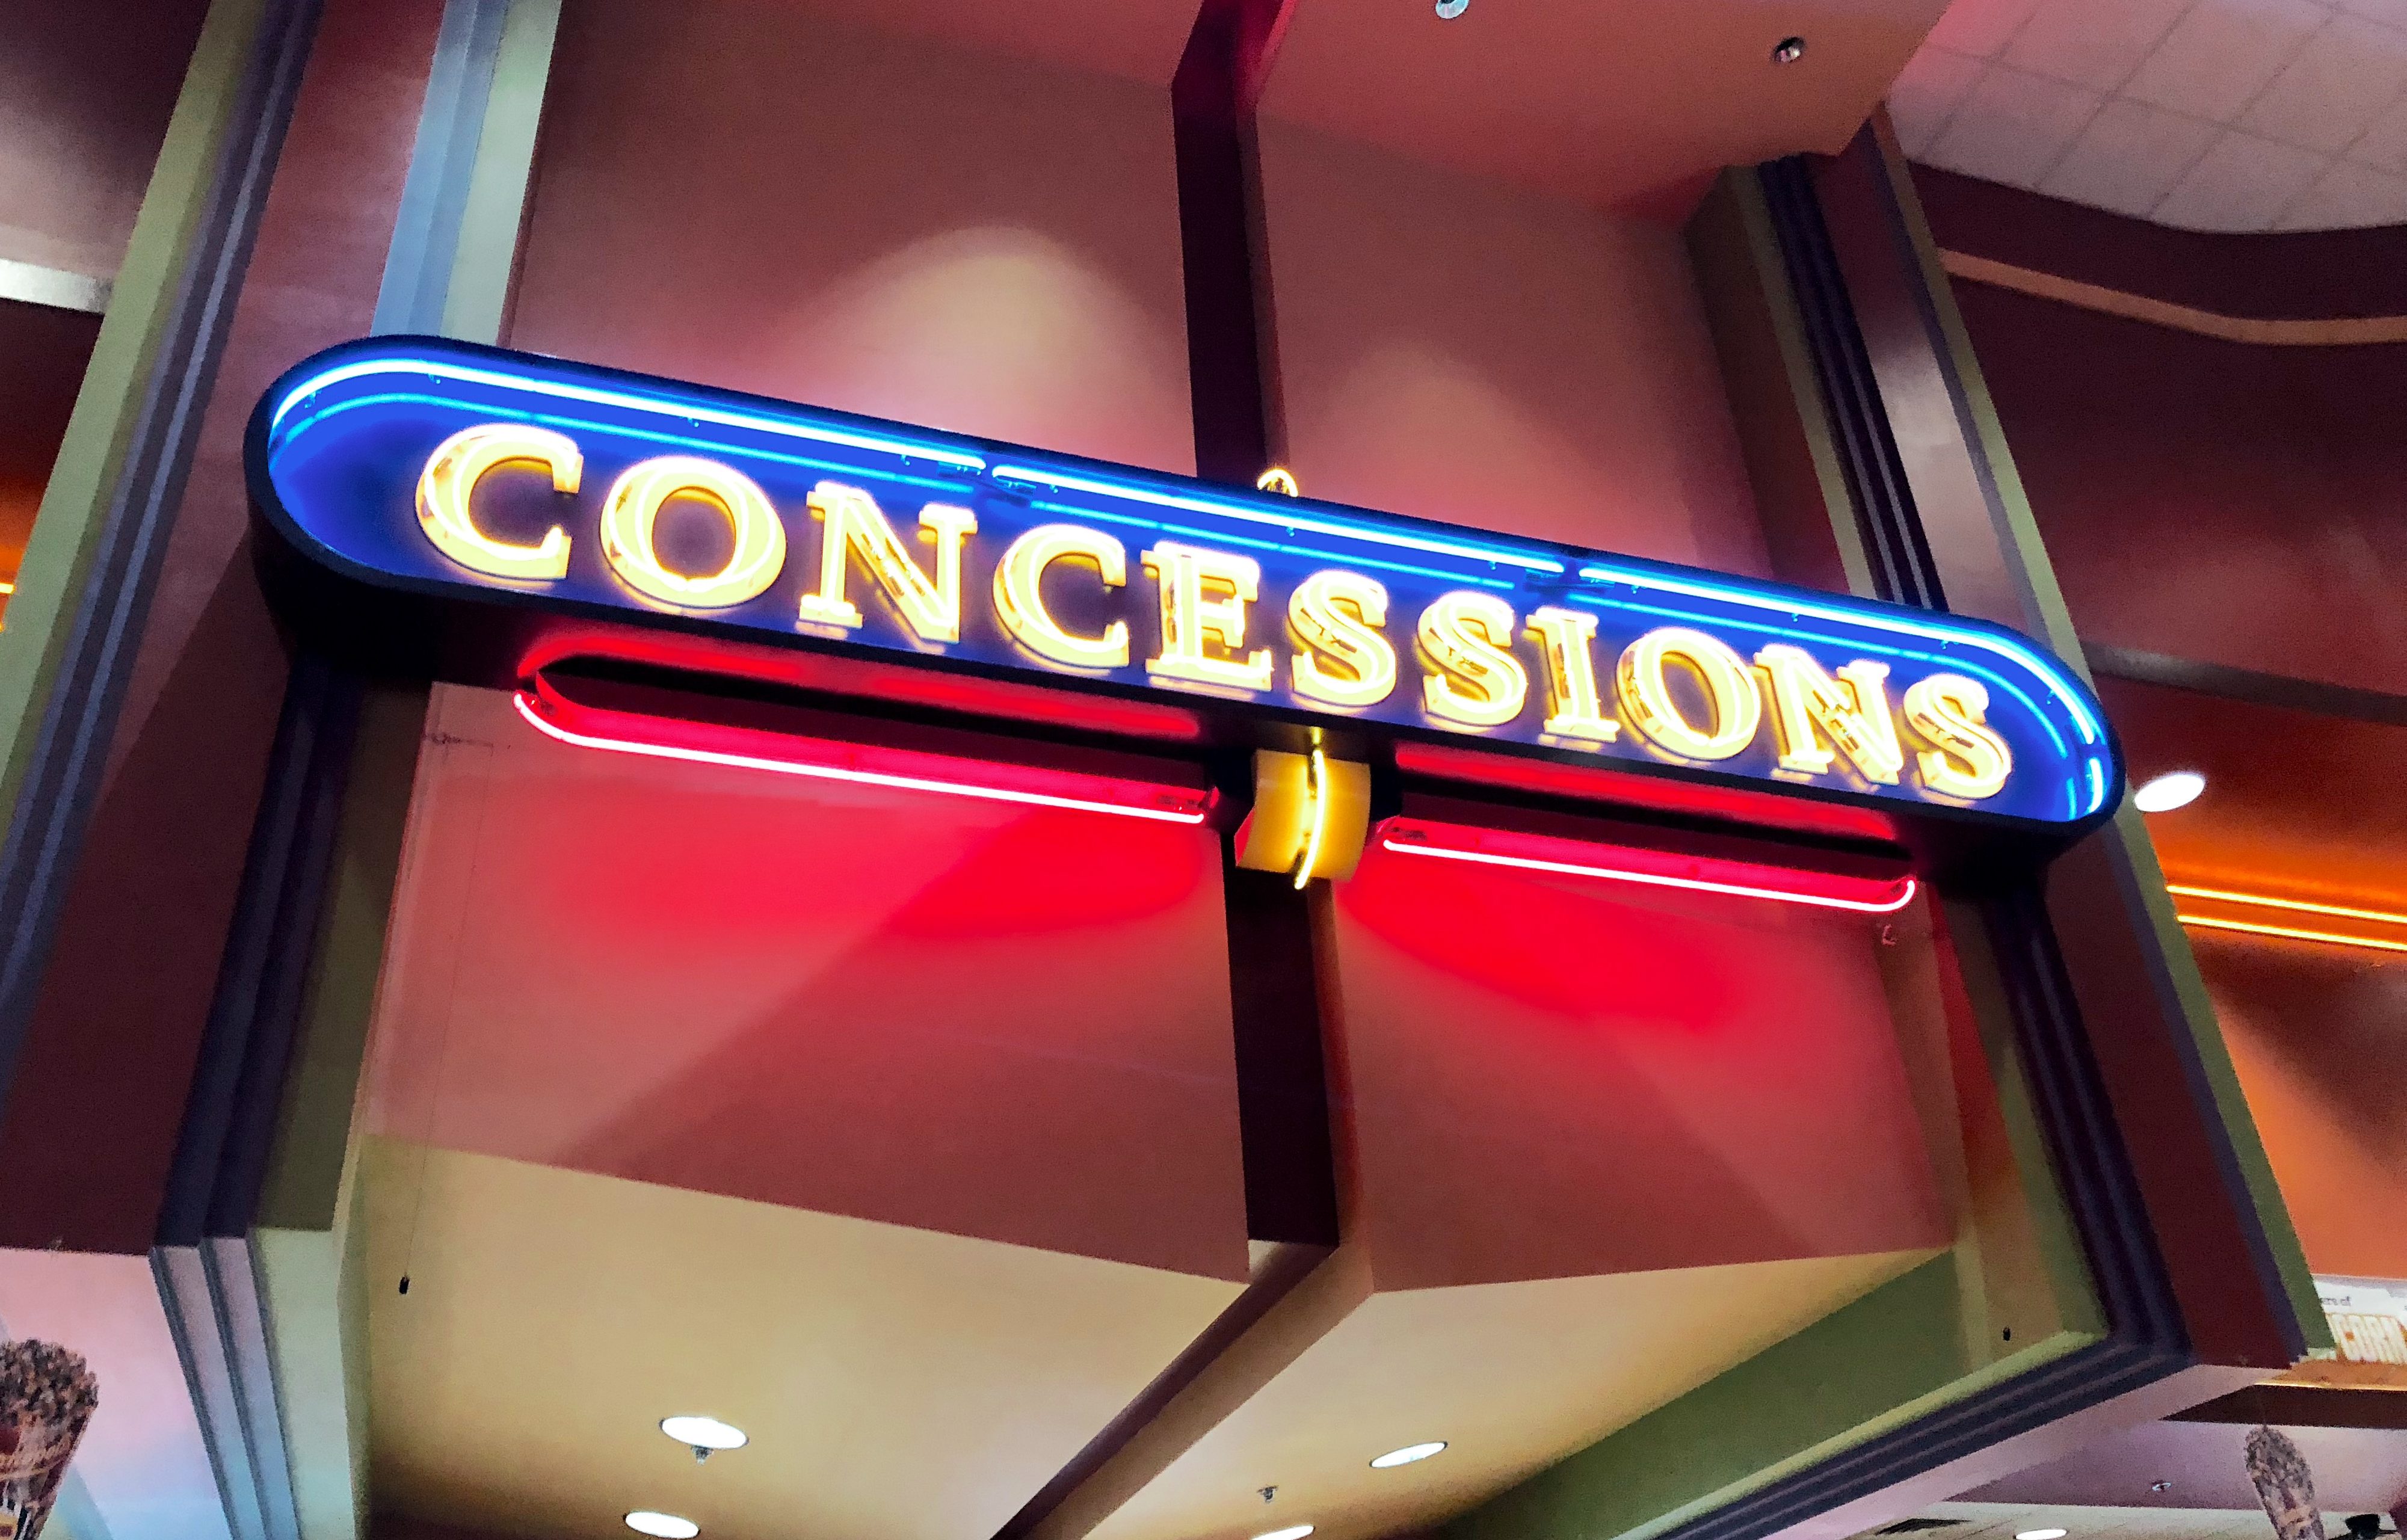 simple movie theater hacks that save money - movie concessions sign